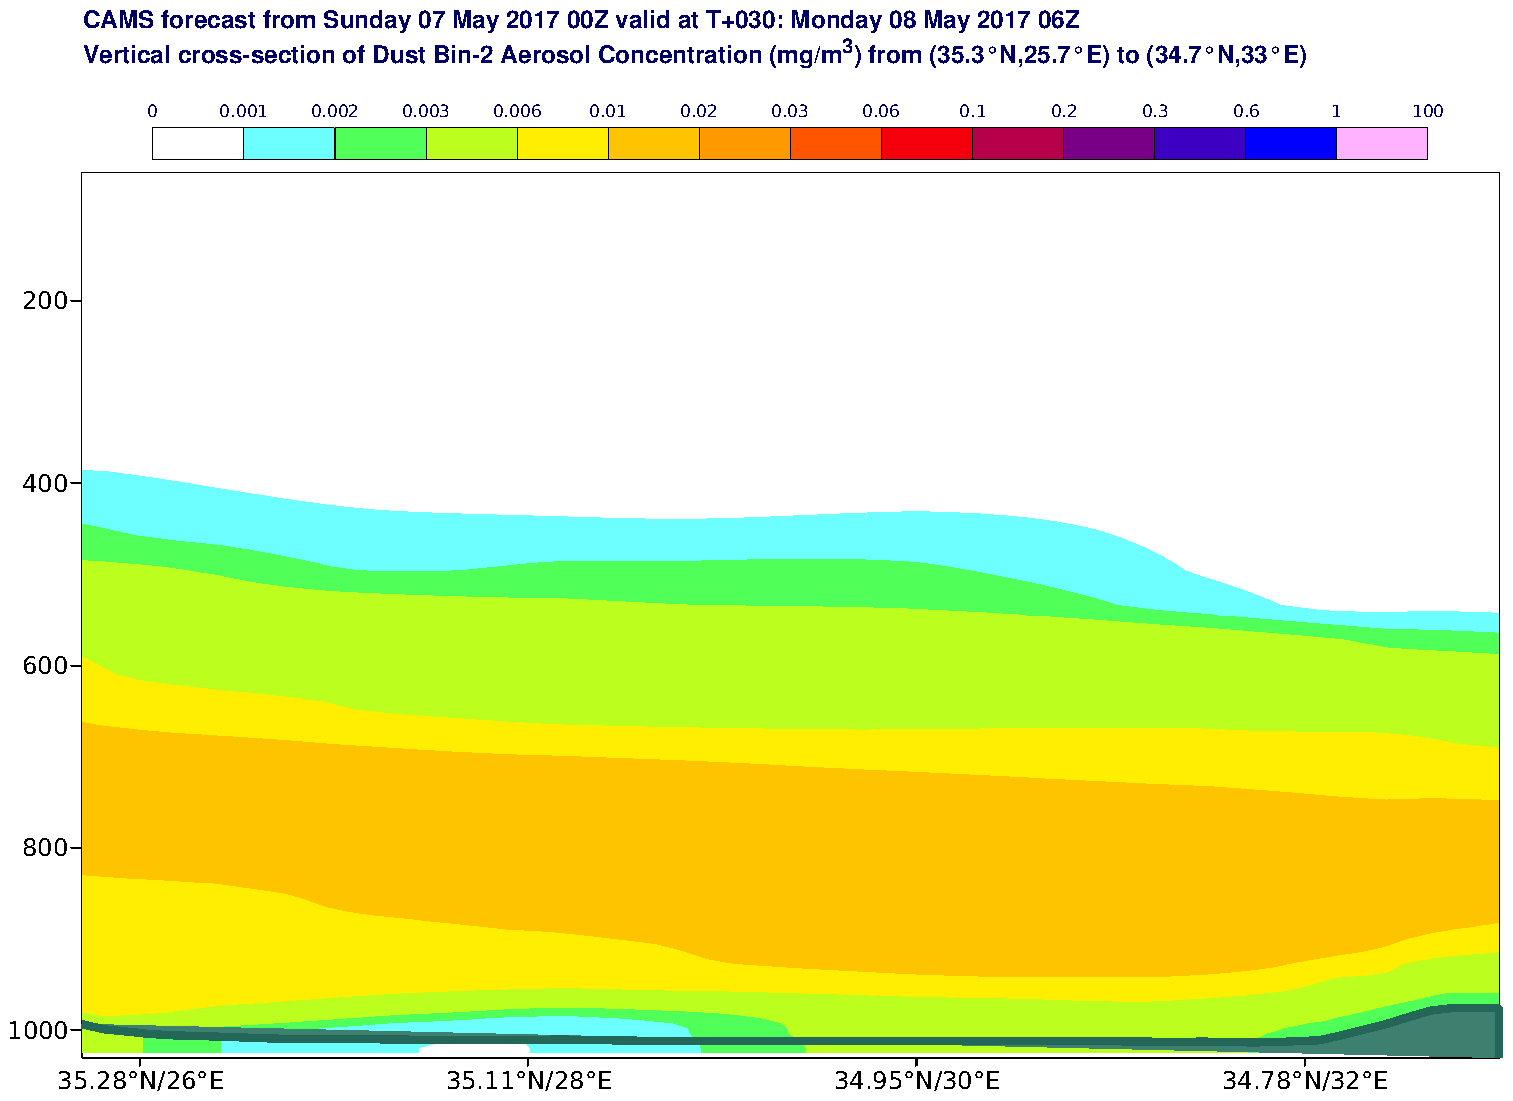 Vertical cross-section of Dust Bin-2 Aerosol Concentration (mg/m3) valid at T30 - 2017-05-08 06:00